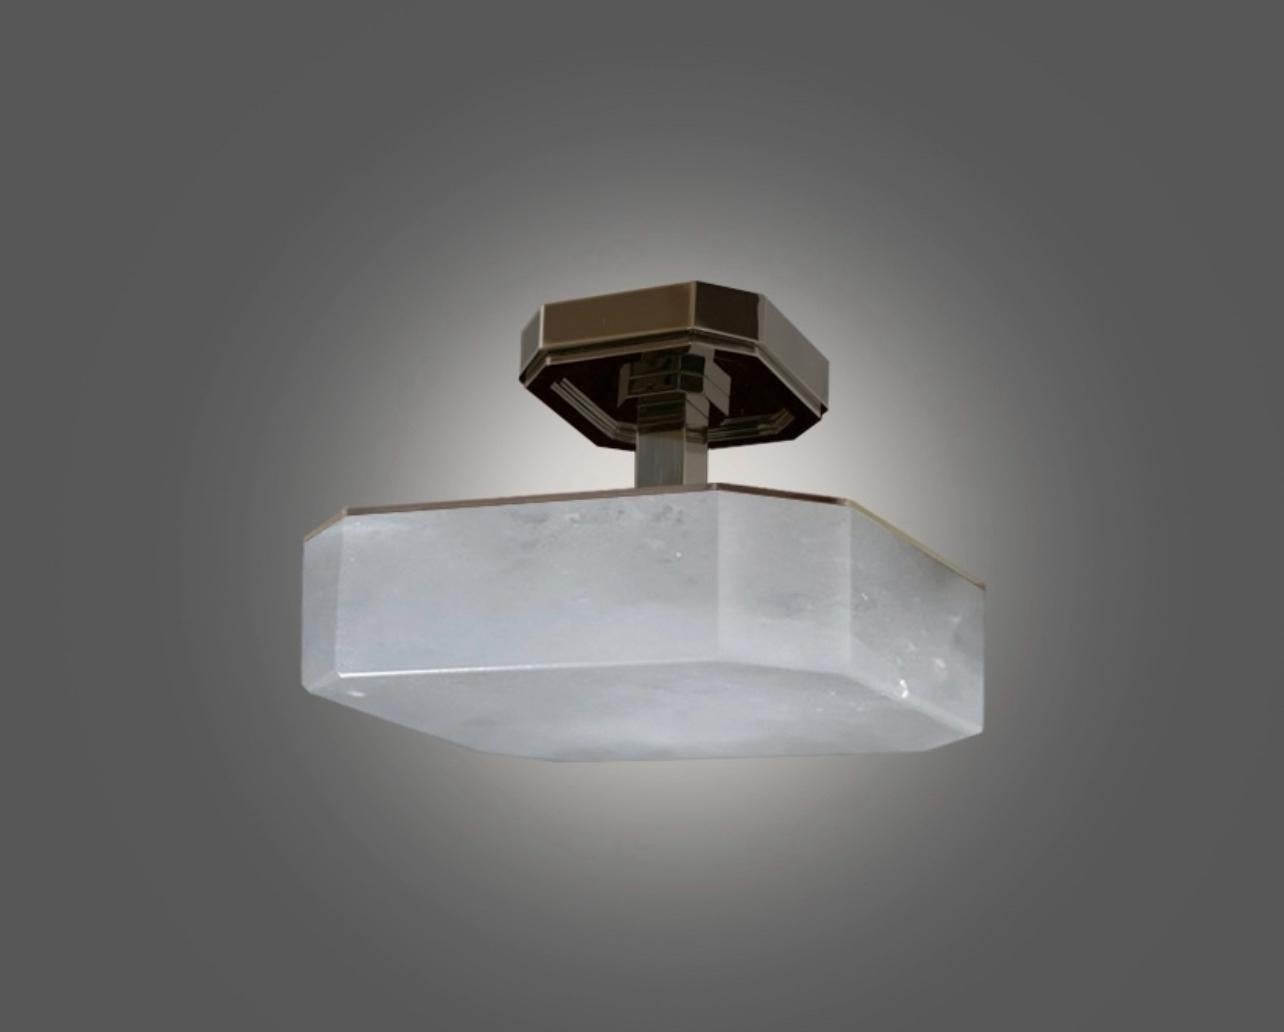 Carved octagonal form rock Crystal semi flush mount,created by Phoenix  Aged brass finish  Three E12 socket installed,180w total